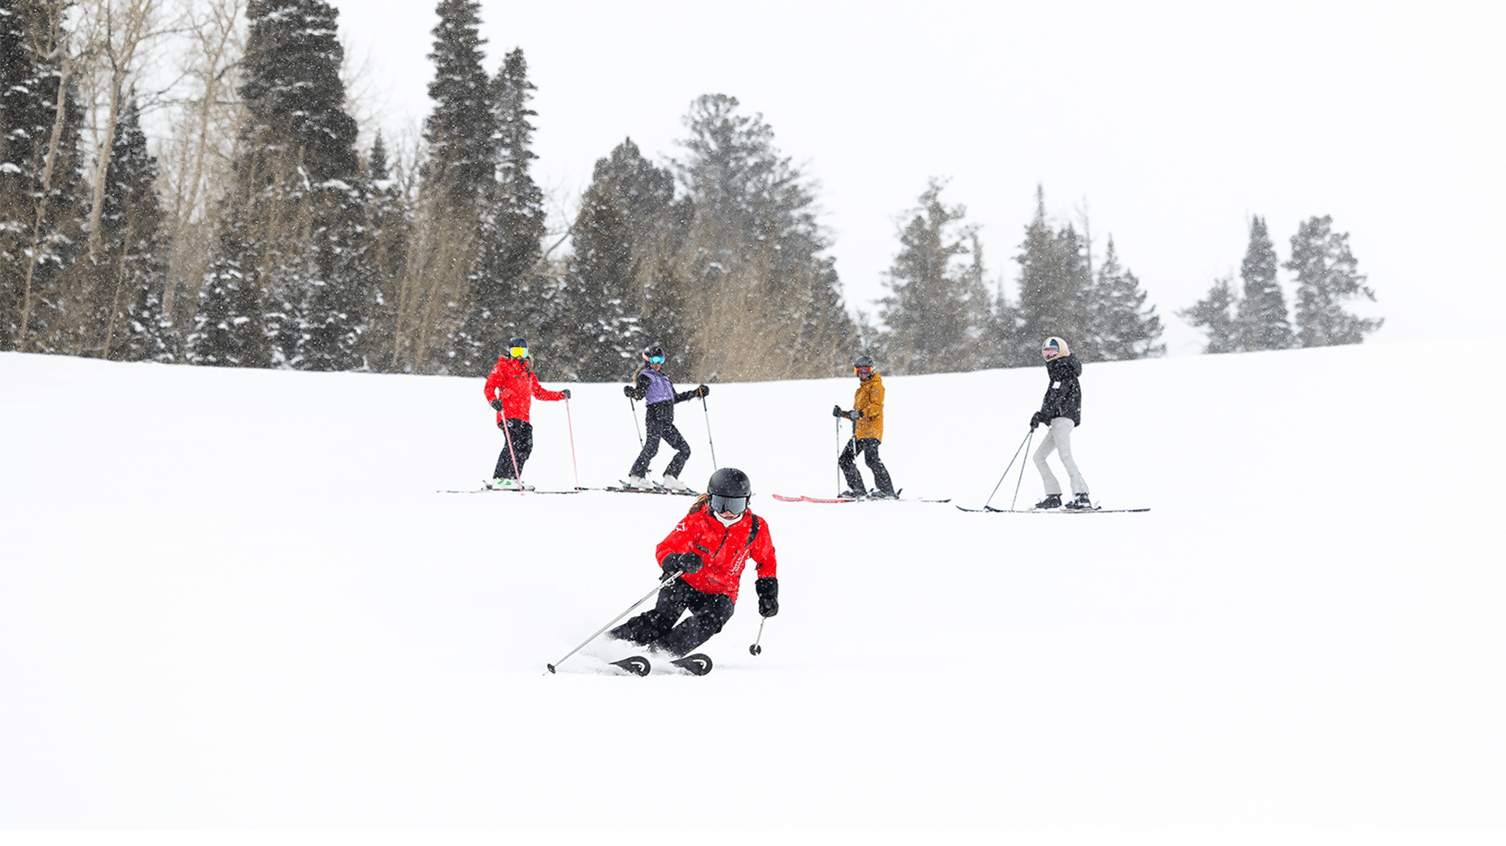 Ski instructor leads group at Aspen Snowmass